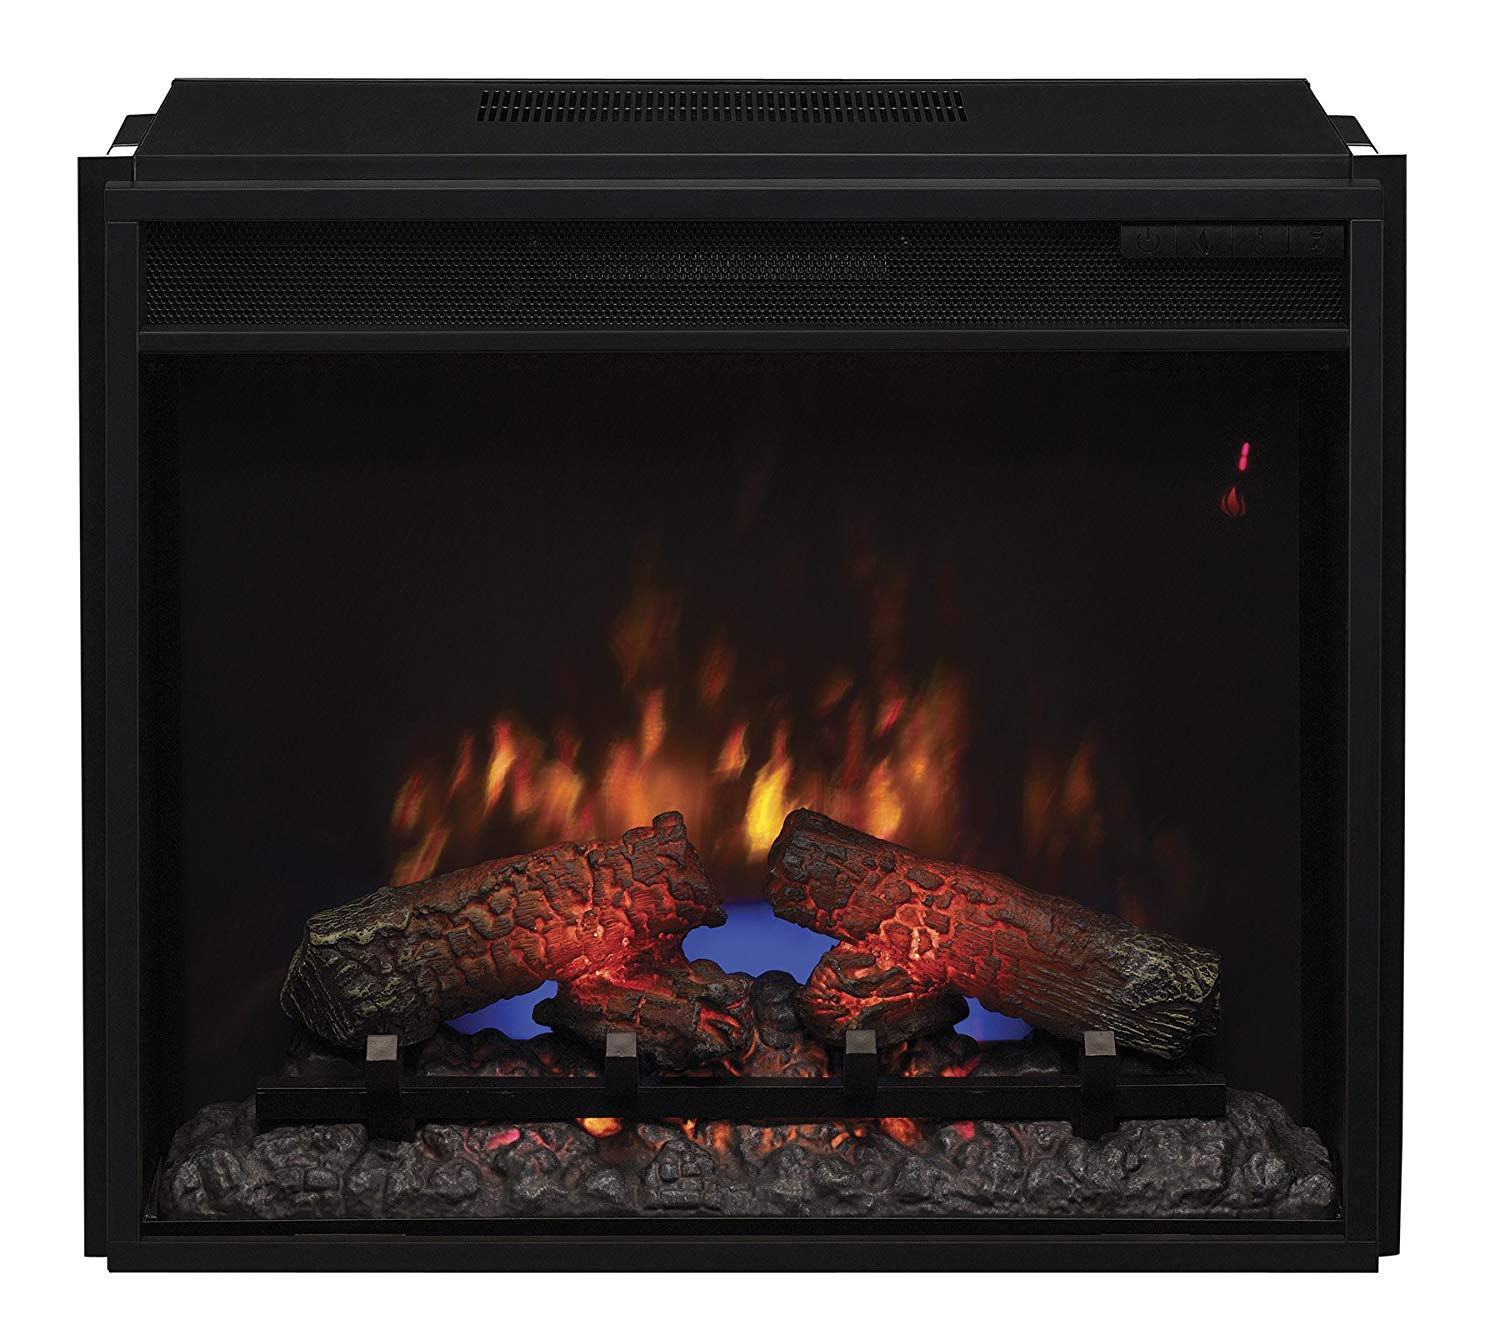 Tv Stands for Flat Screens with Fireplace Fresh Classicflame 23ef031grp 23" Electric Fireplace Insert with Safer Plug